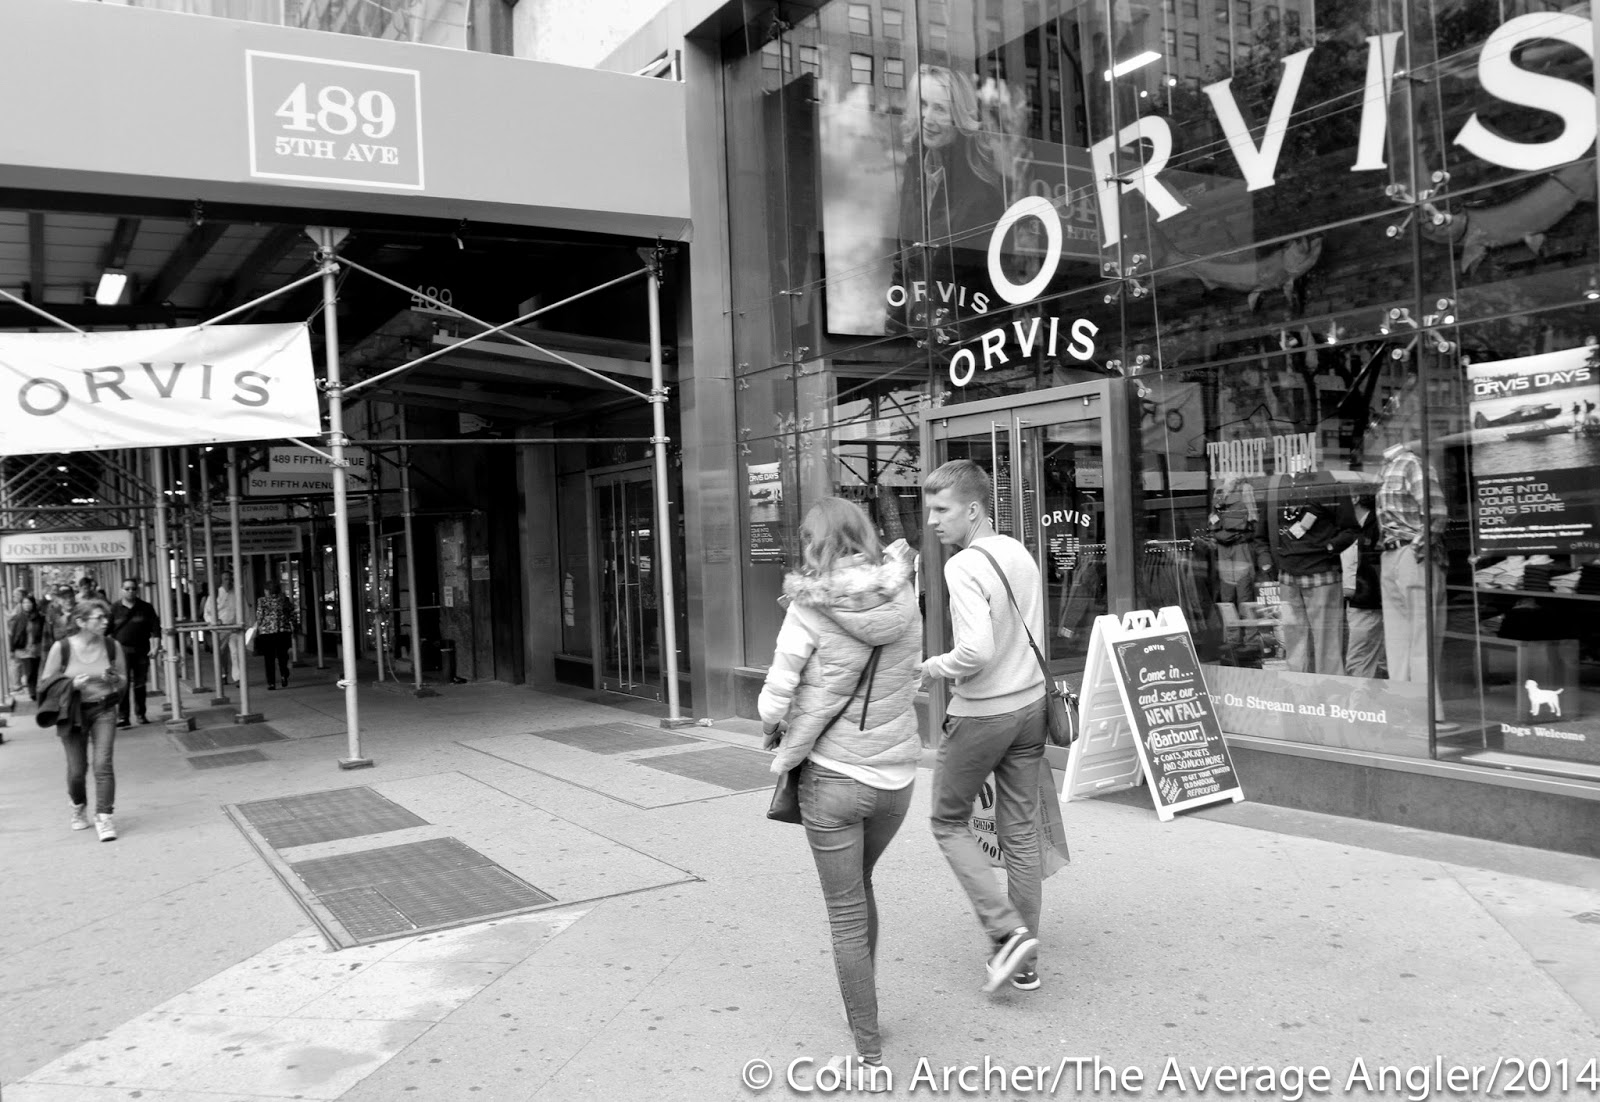 The Average Angler: 10.02.14 Great time at Orvis NYC Happy Hour.dig  the staff as always.but not the new space